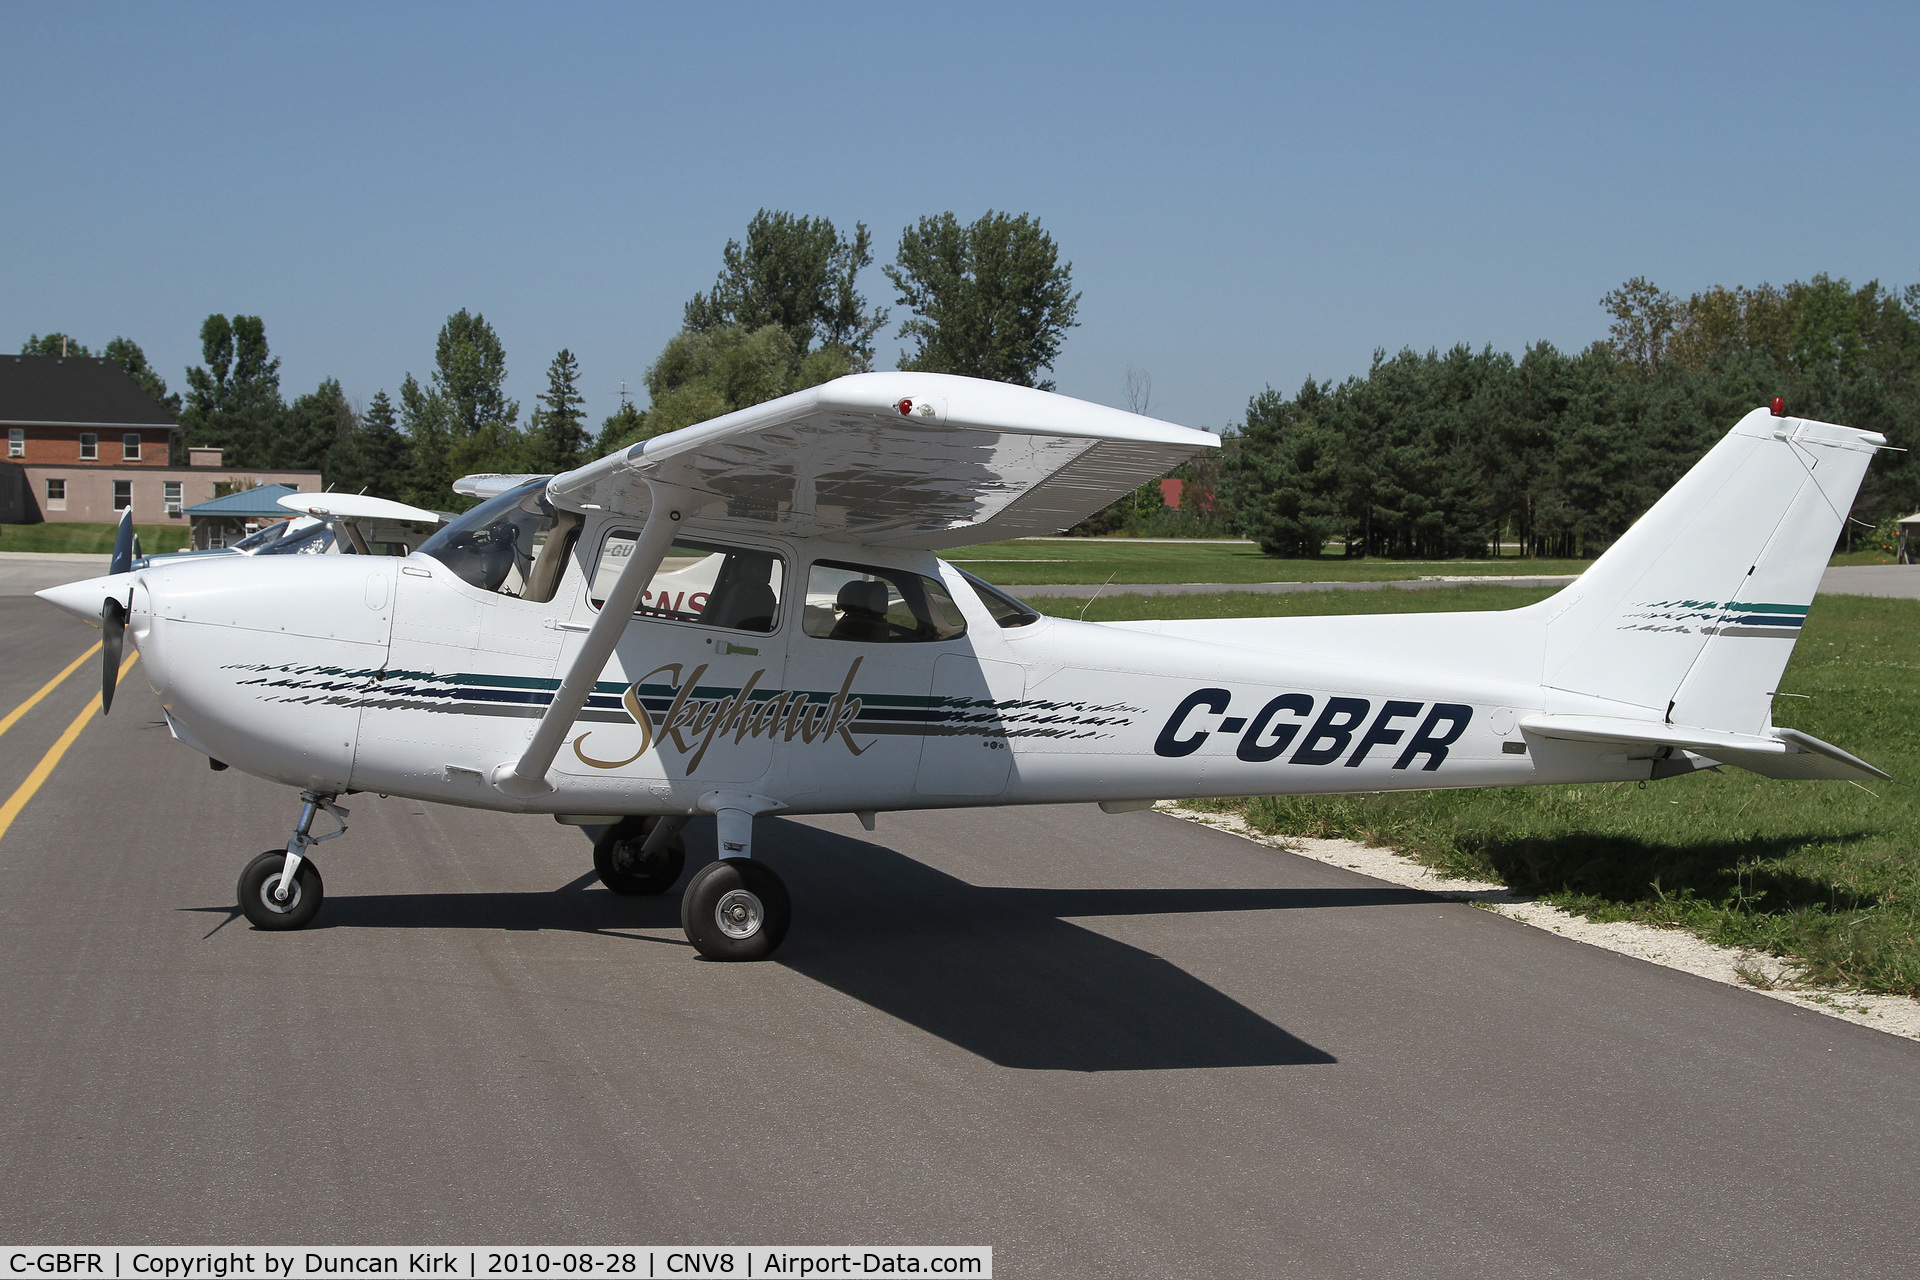 C-GBFR, 1997 Cessna 172R C/N 17280128, Cessna 172 at Edenvale where there's a nice restaurant!